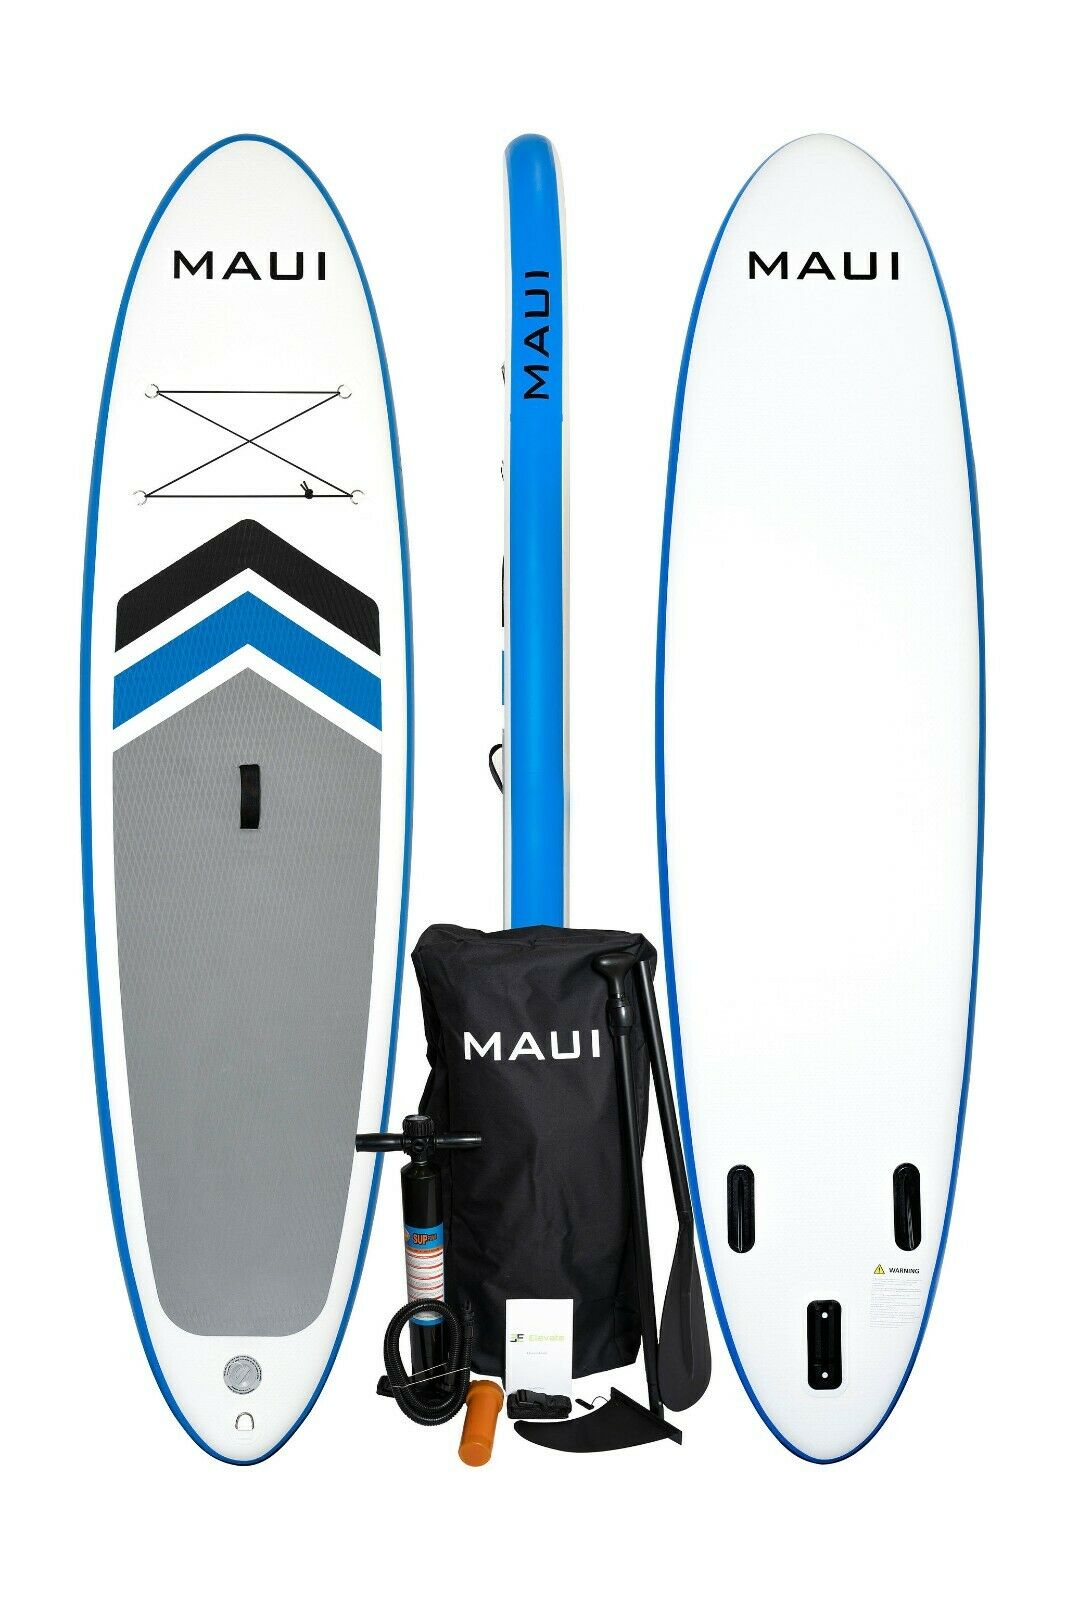 Maui Featherlight Inflatable Premium Stand Up Paddleboard Package Isup Kit